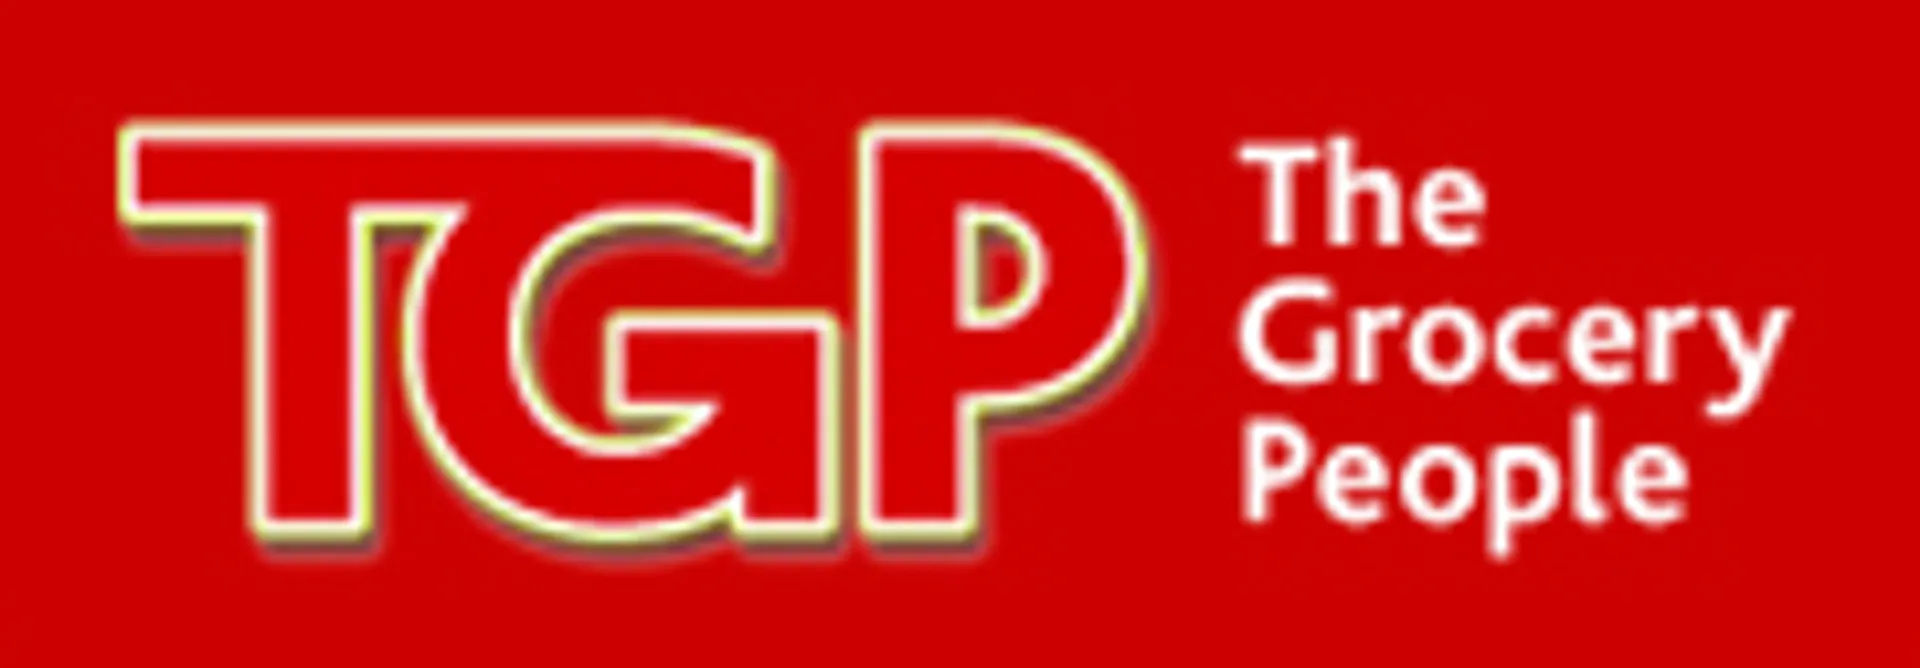 TGP THE GROCERY PEOPLE logo